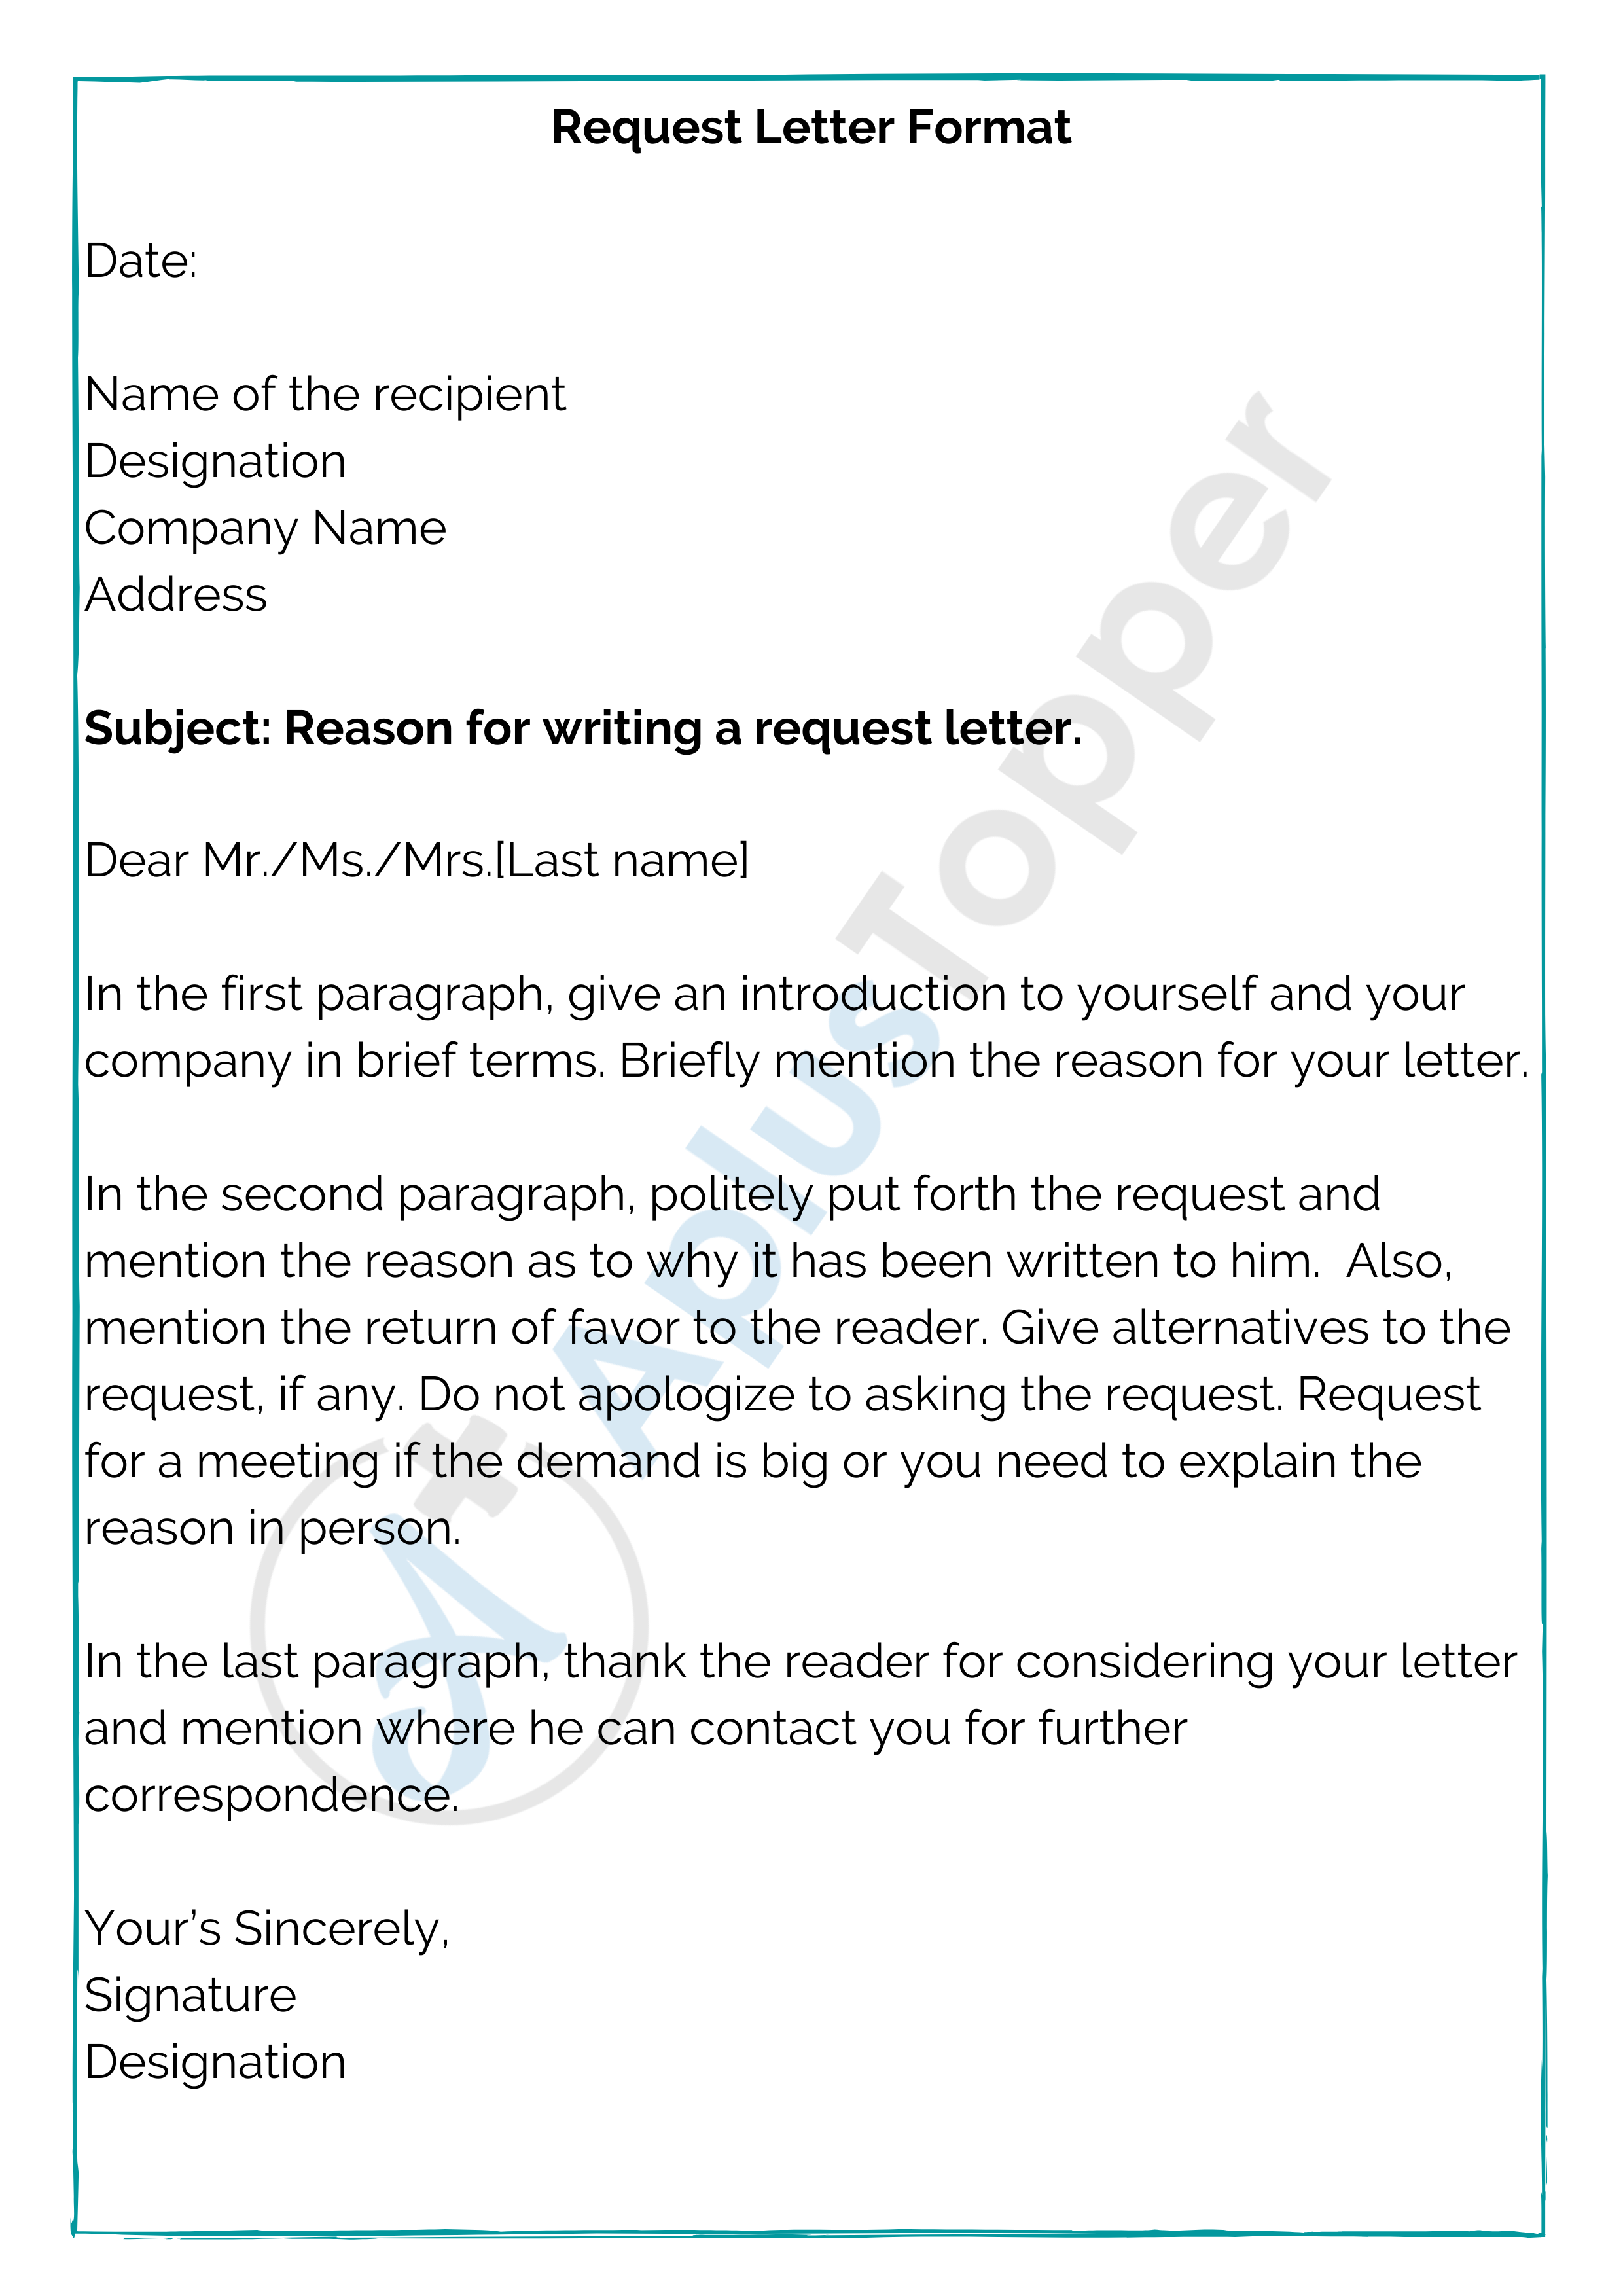 Request Letter | Format, Template and Samples | Request ...